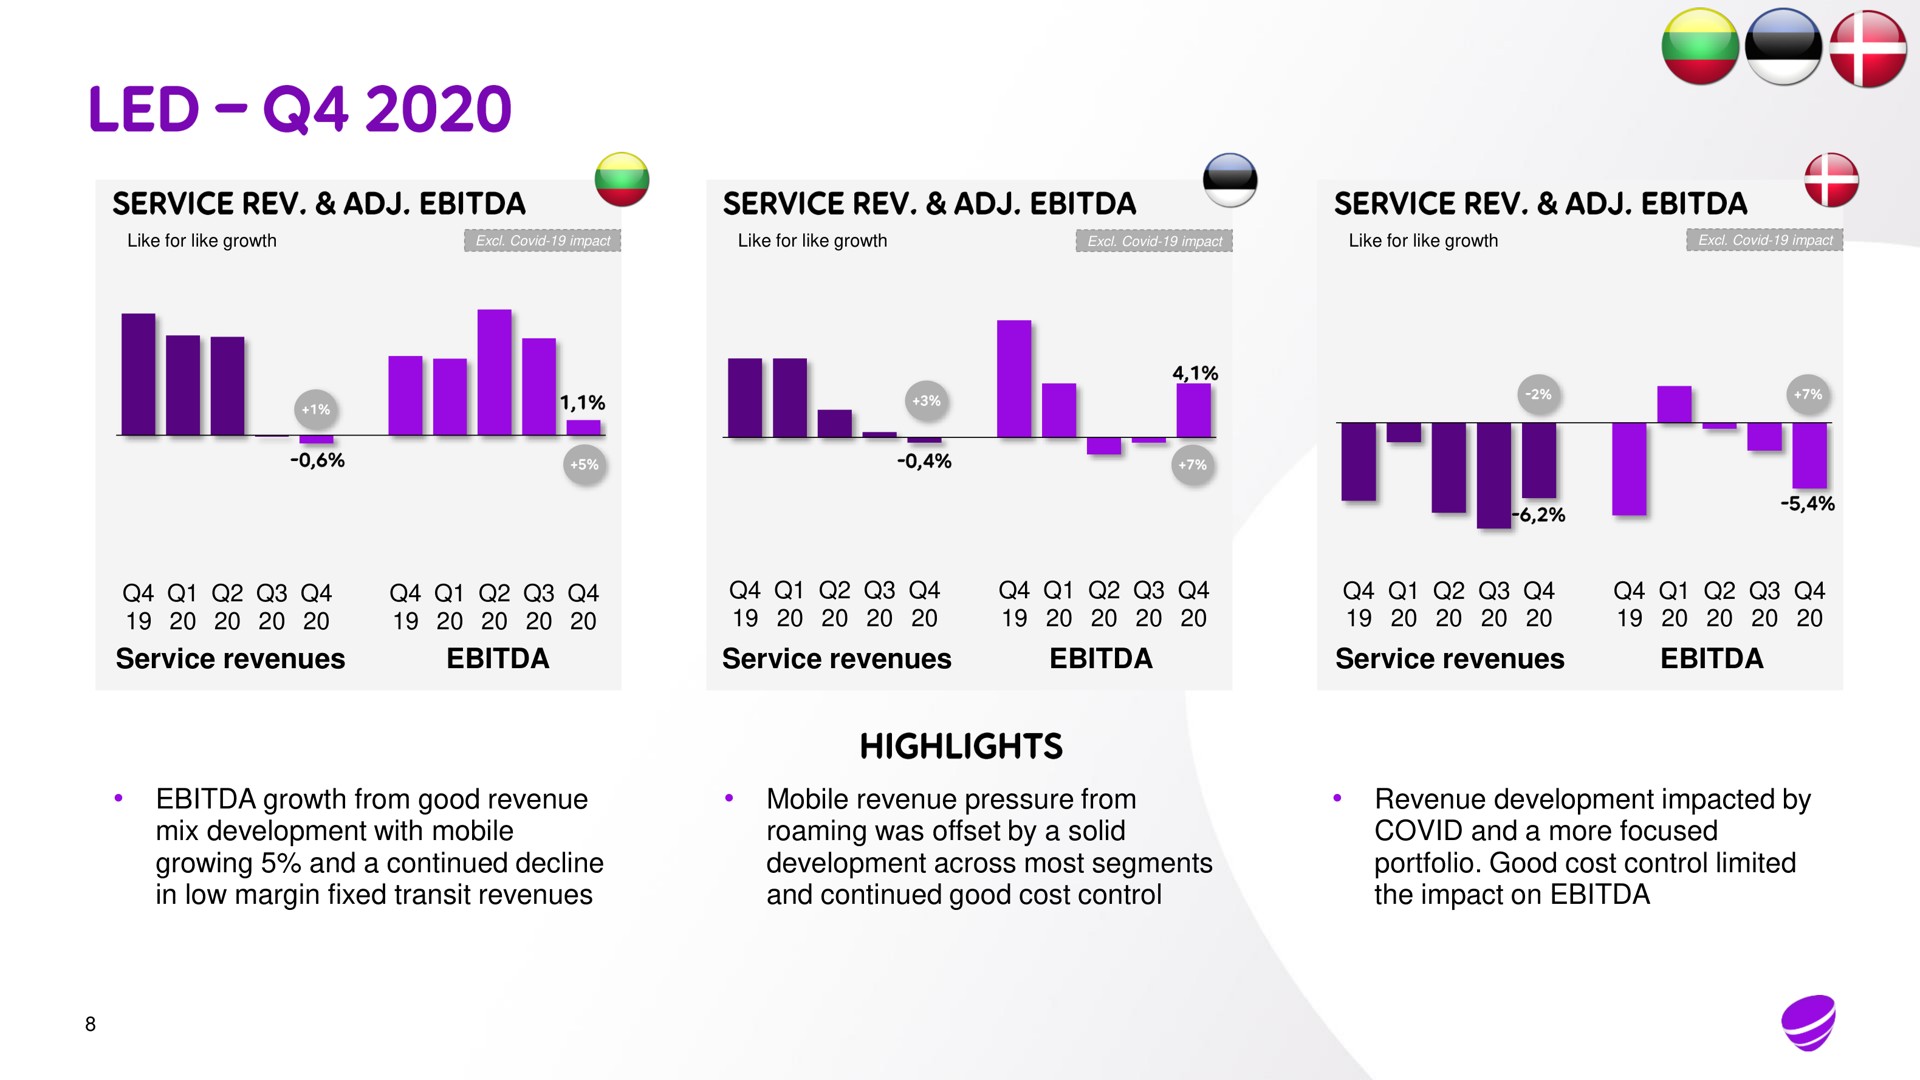 service revenues service revenues service revenues growth from good revenue mix development with mobile growing and a continued decline in low margin fixed transit revenues mobile revenue pressure from roaming was offset by a solid development across most segments and continued good cost control revenue development impacted by covid and a more focused portfolio good cost control limited the impact on led | Telia Company